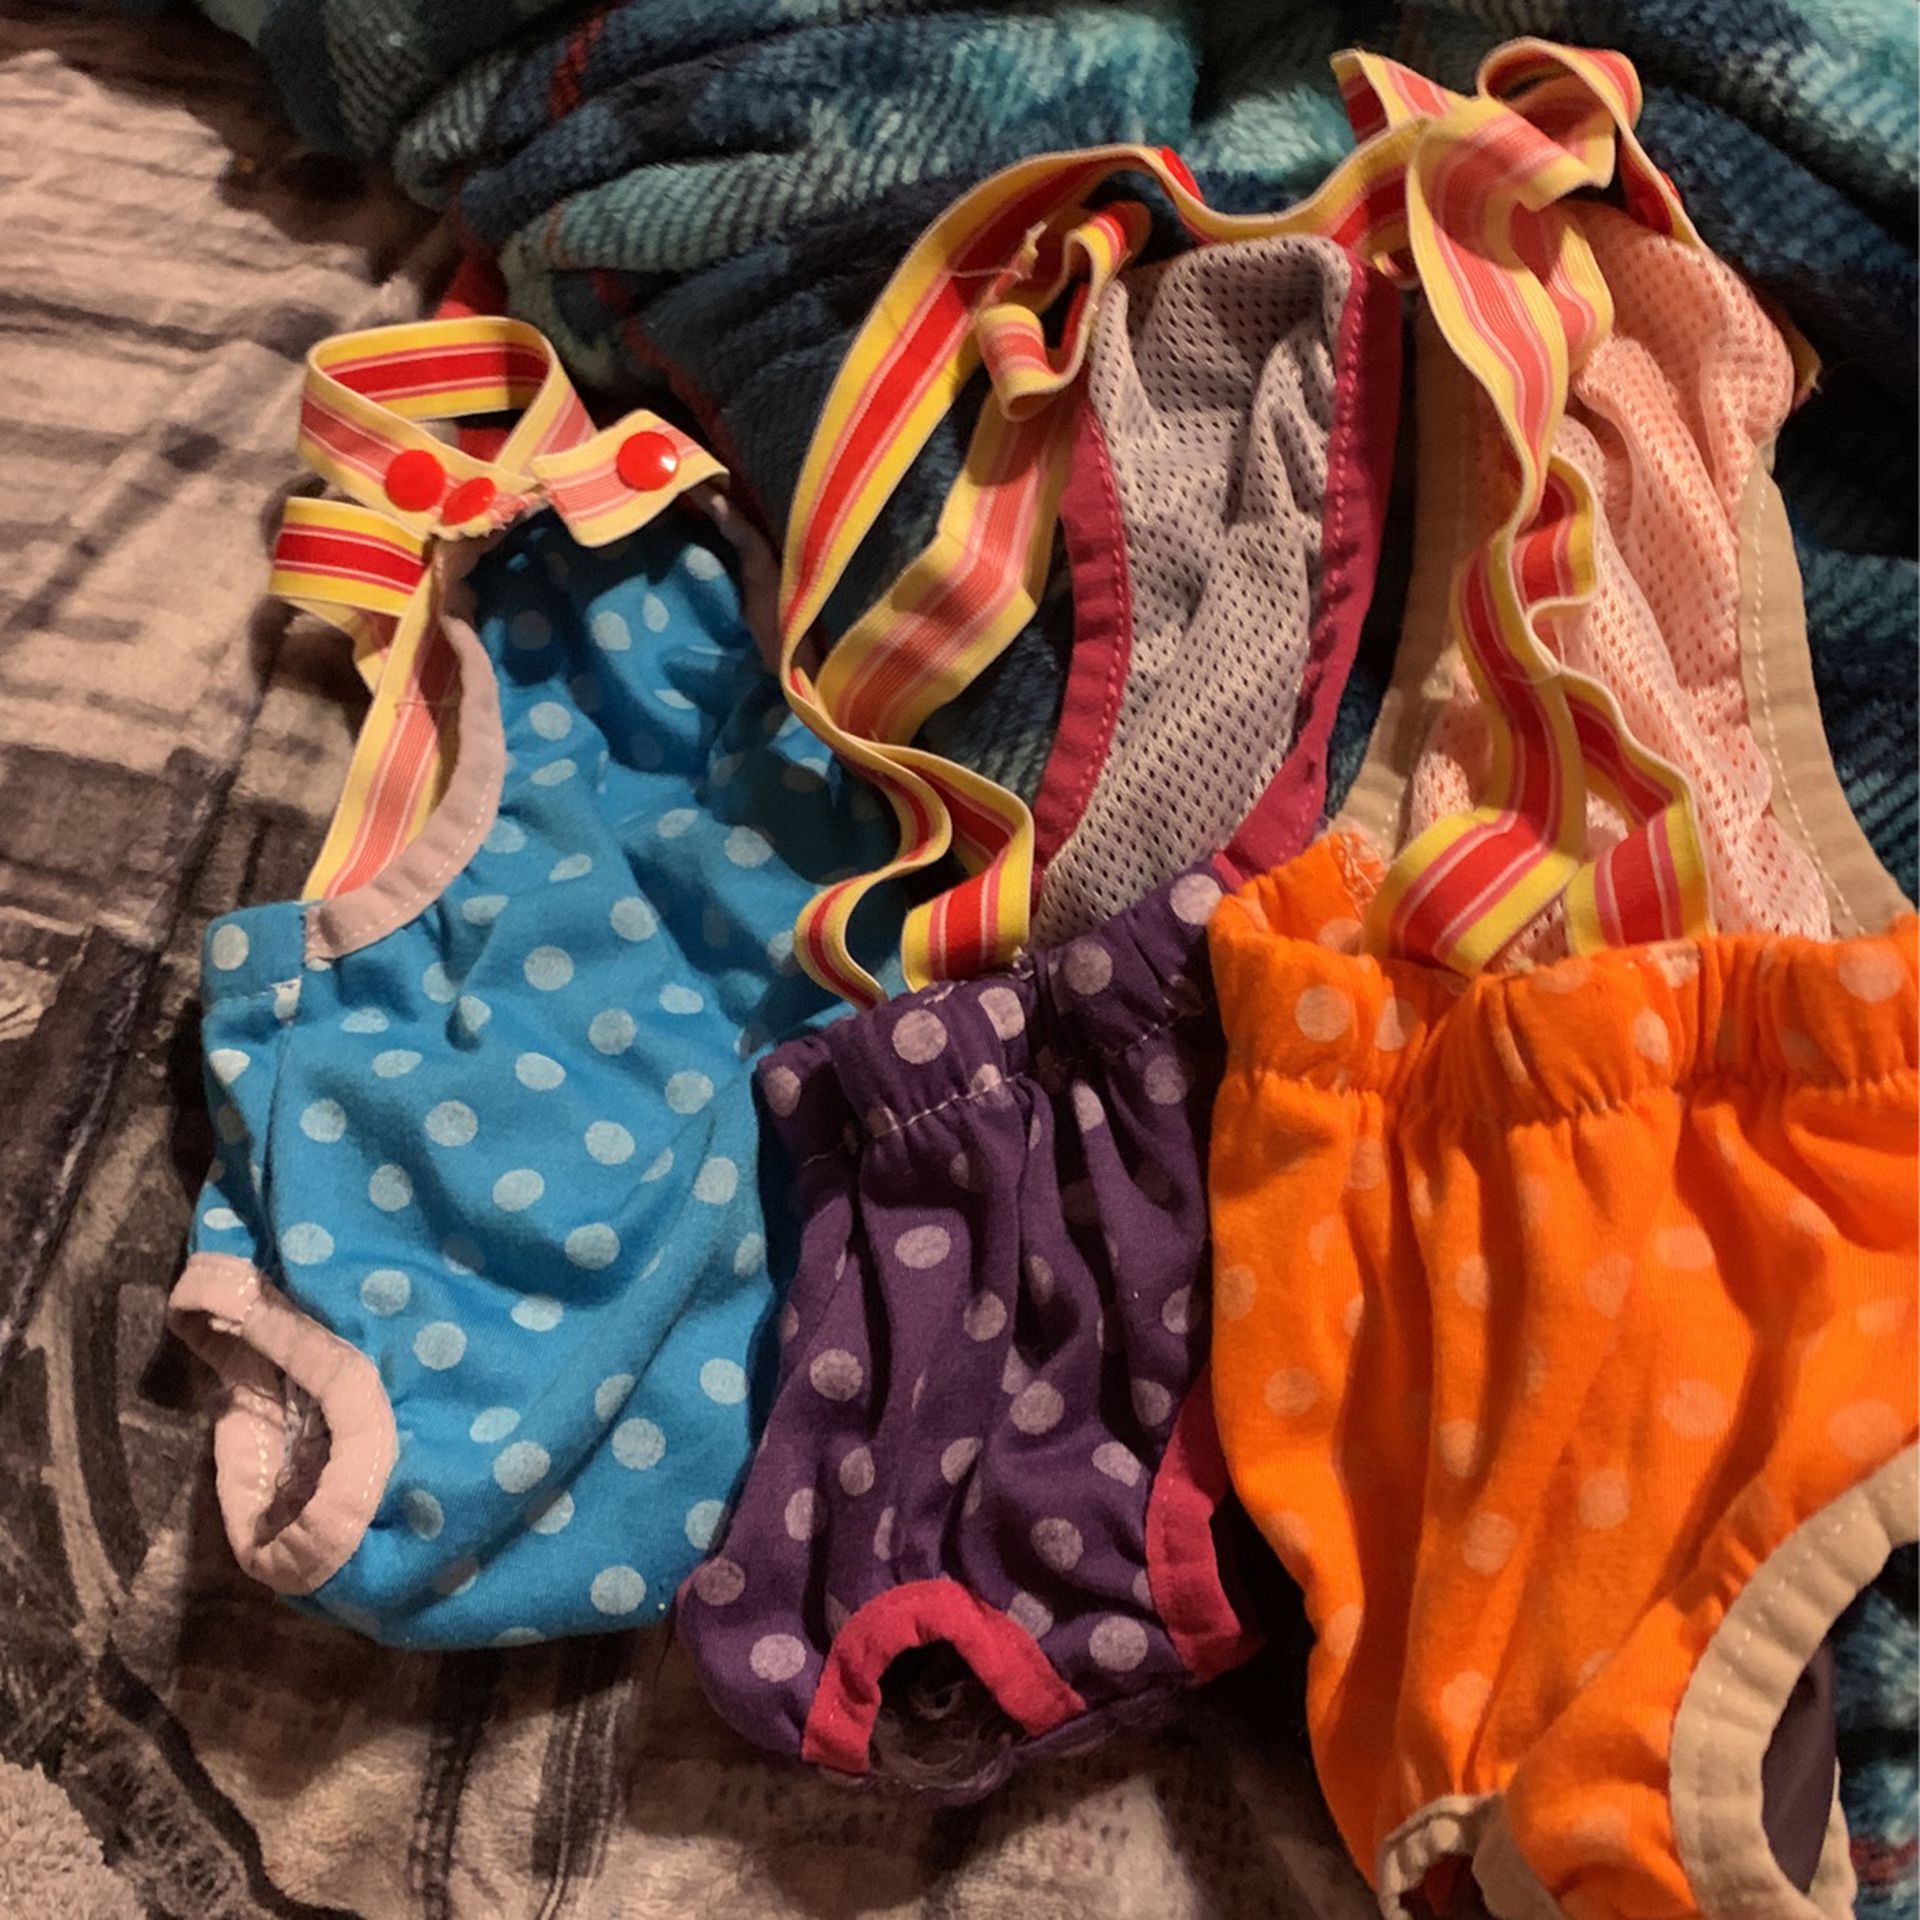 Doggy Jumpers   $5 for two 